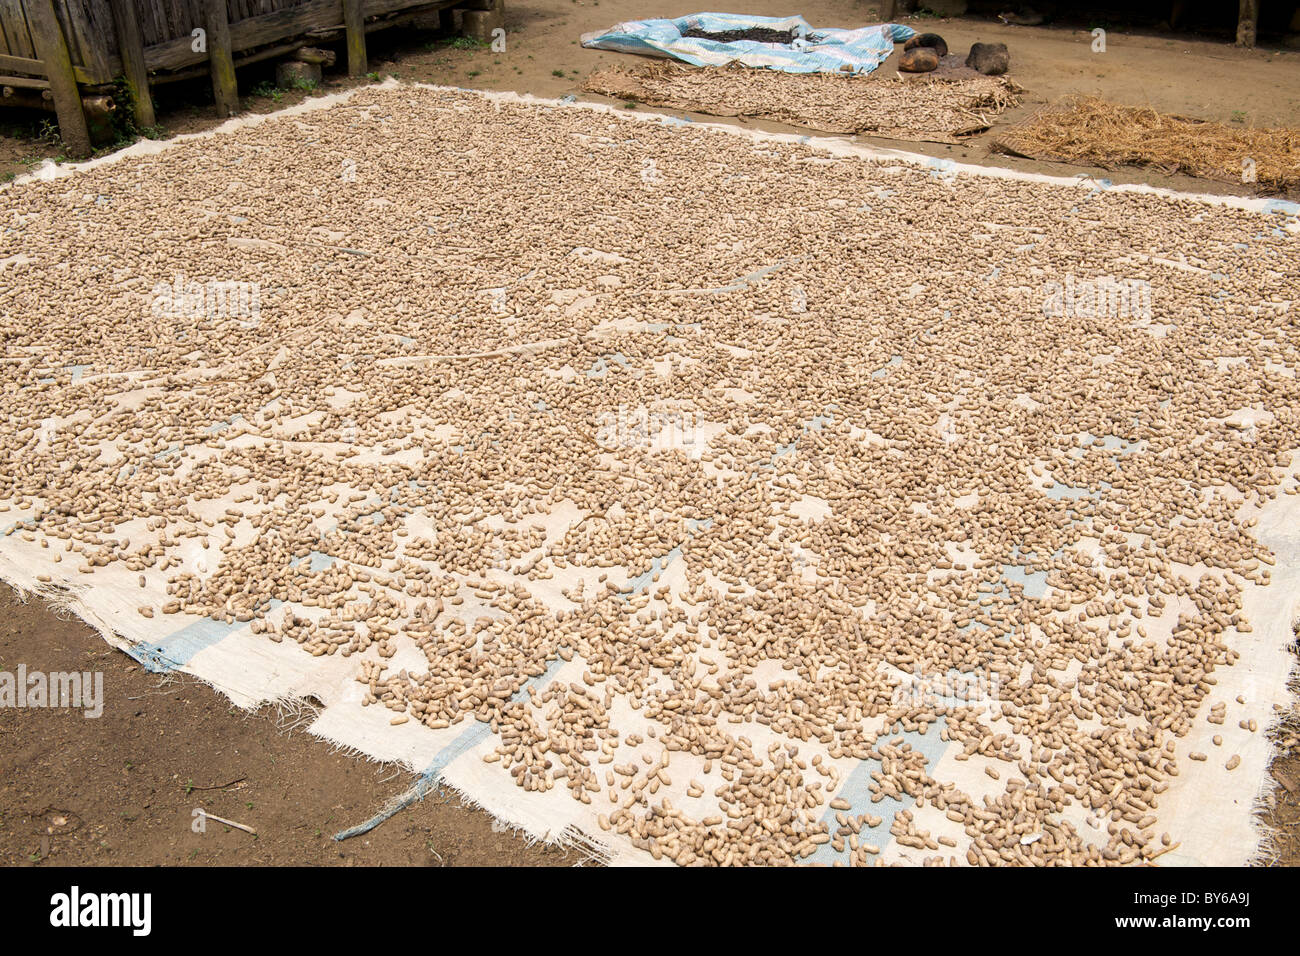 Peanuts drying on the ground in the village of Mandena in the foothills of Marojejy National park in northeast Madagascar. Stock Photo